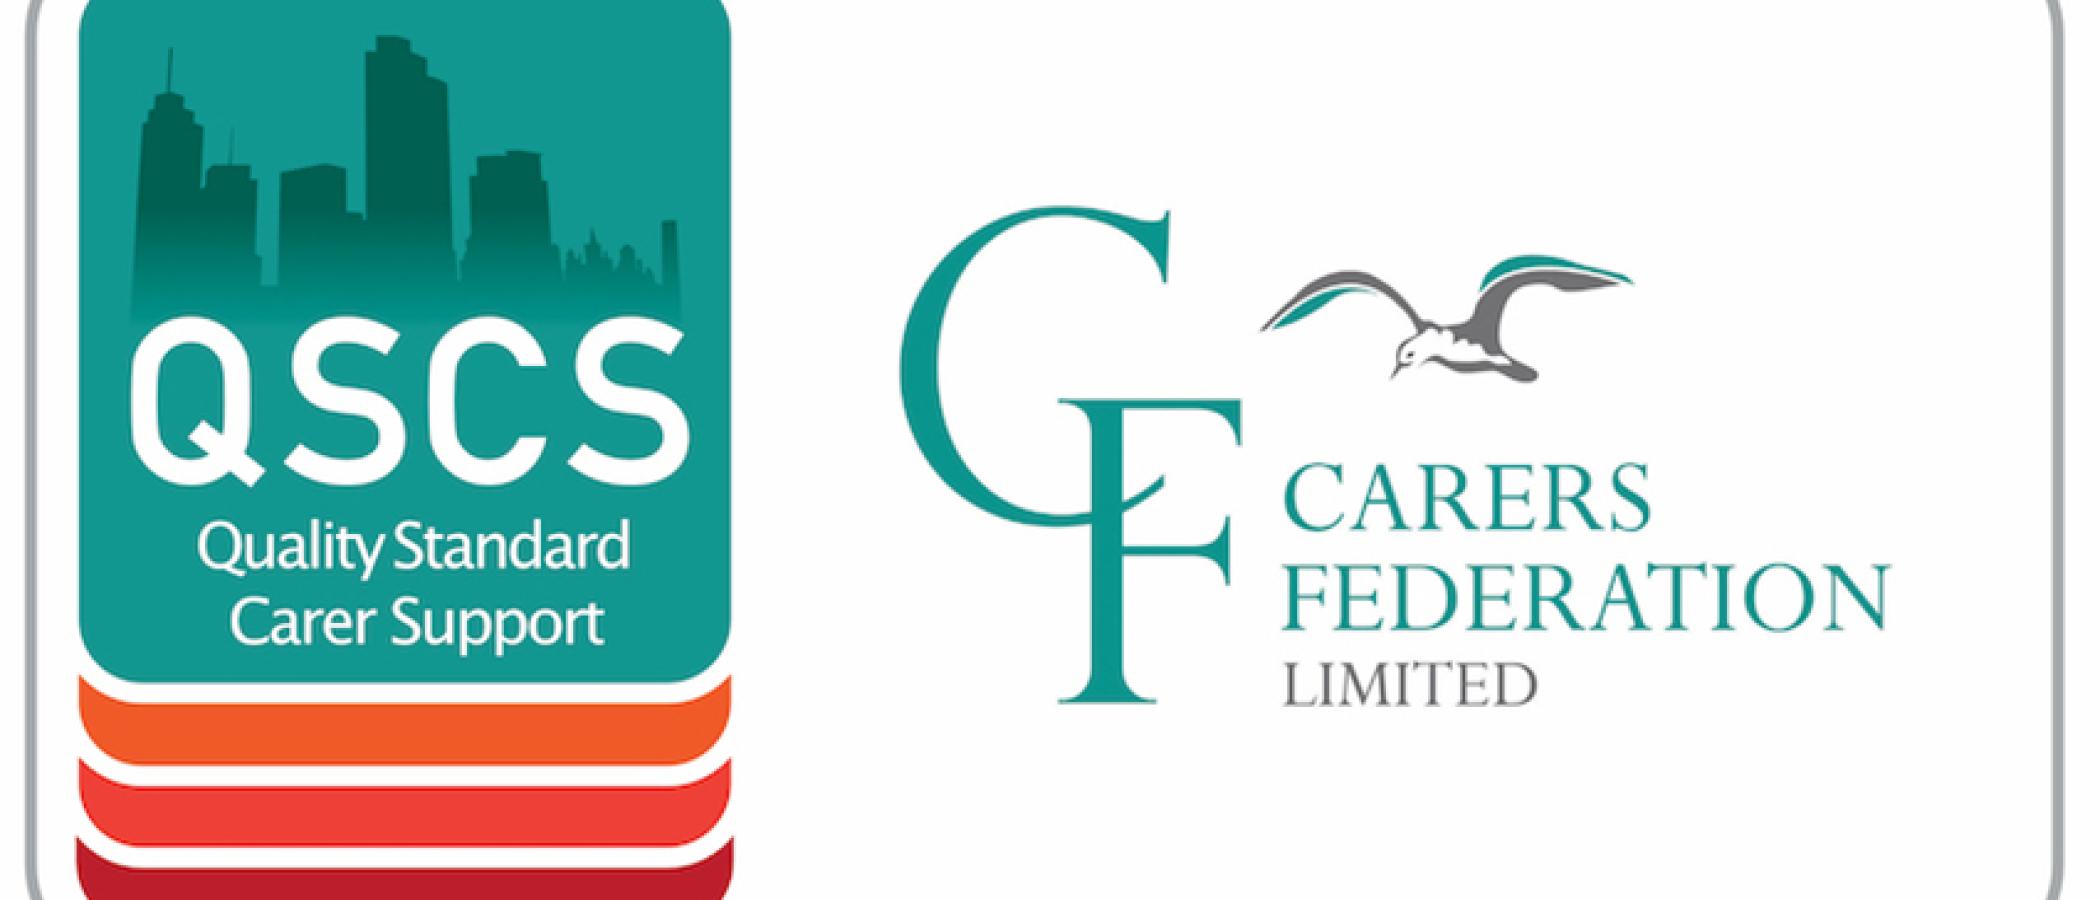 Quality Standard Carer Support logo for the Carers Federation Limited